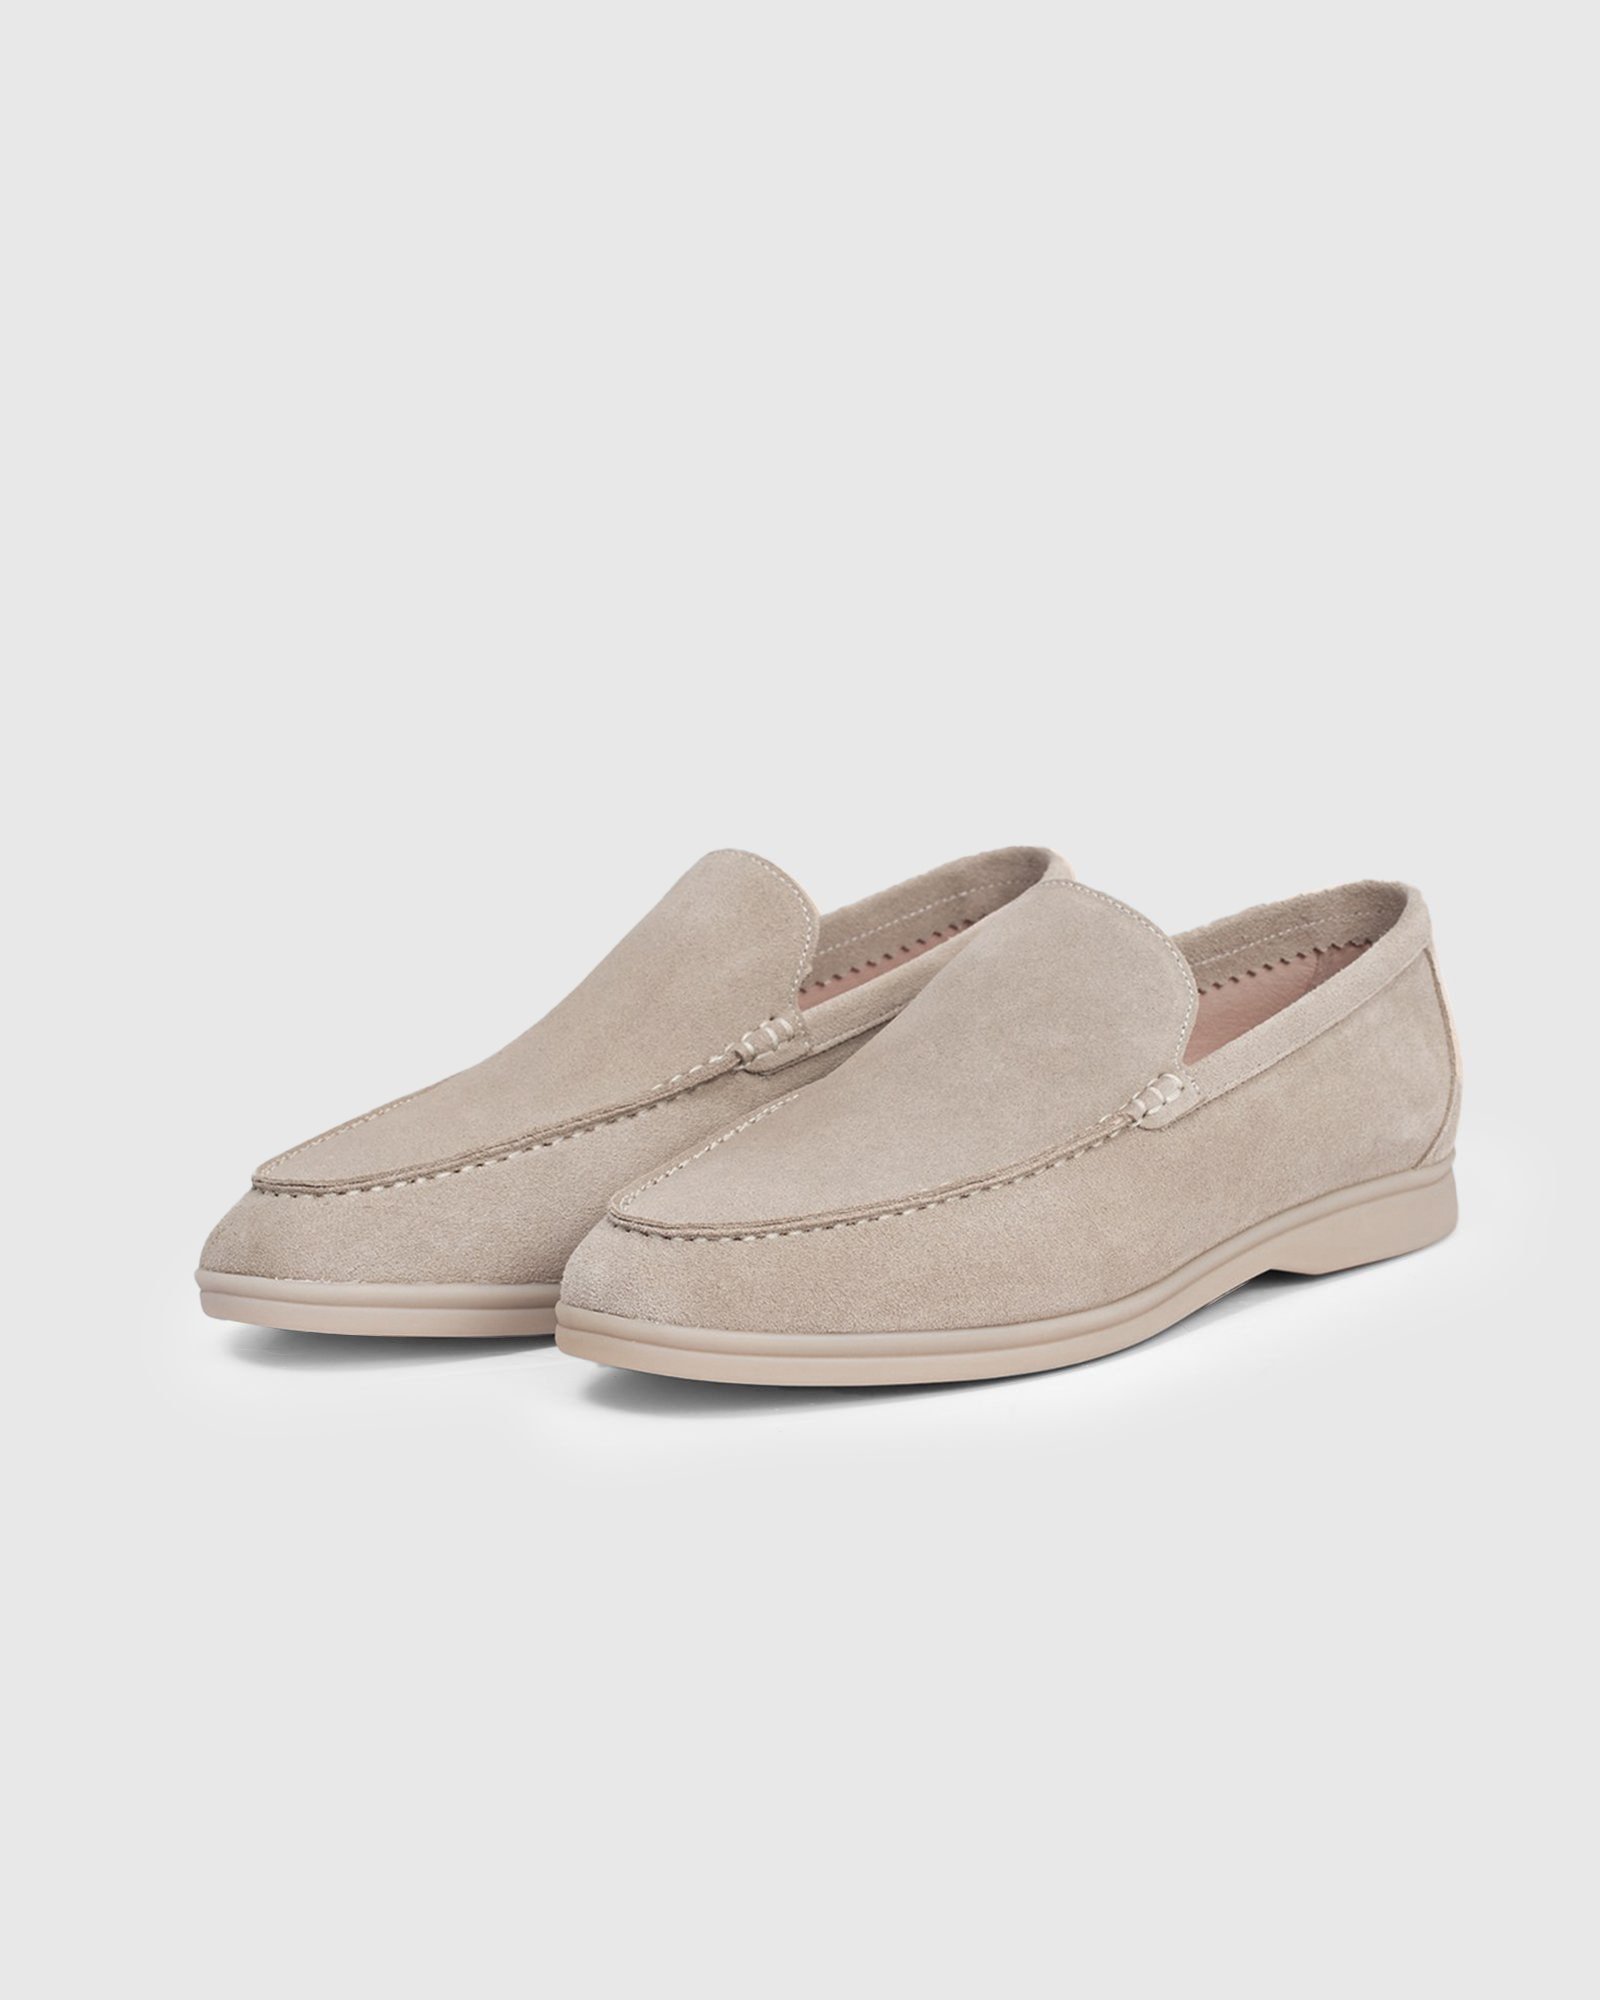  TAIL SUEDE LOAFER 